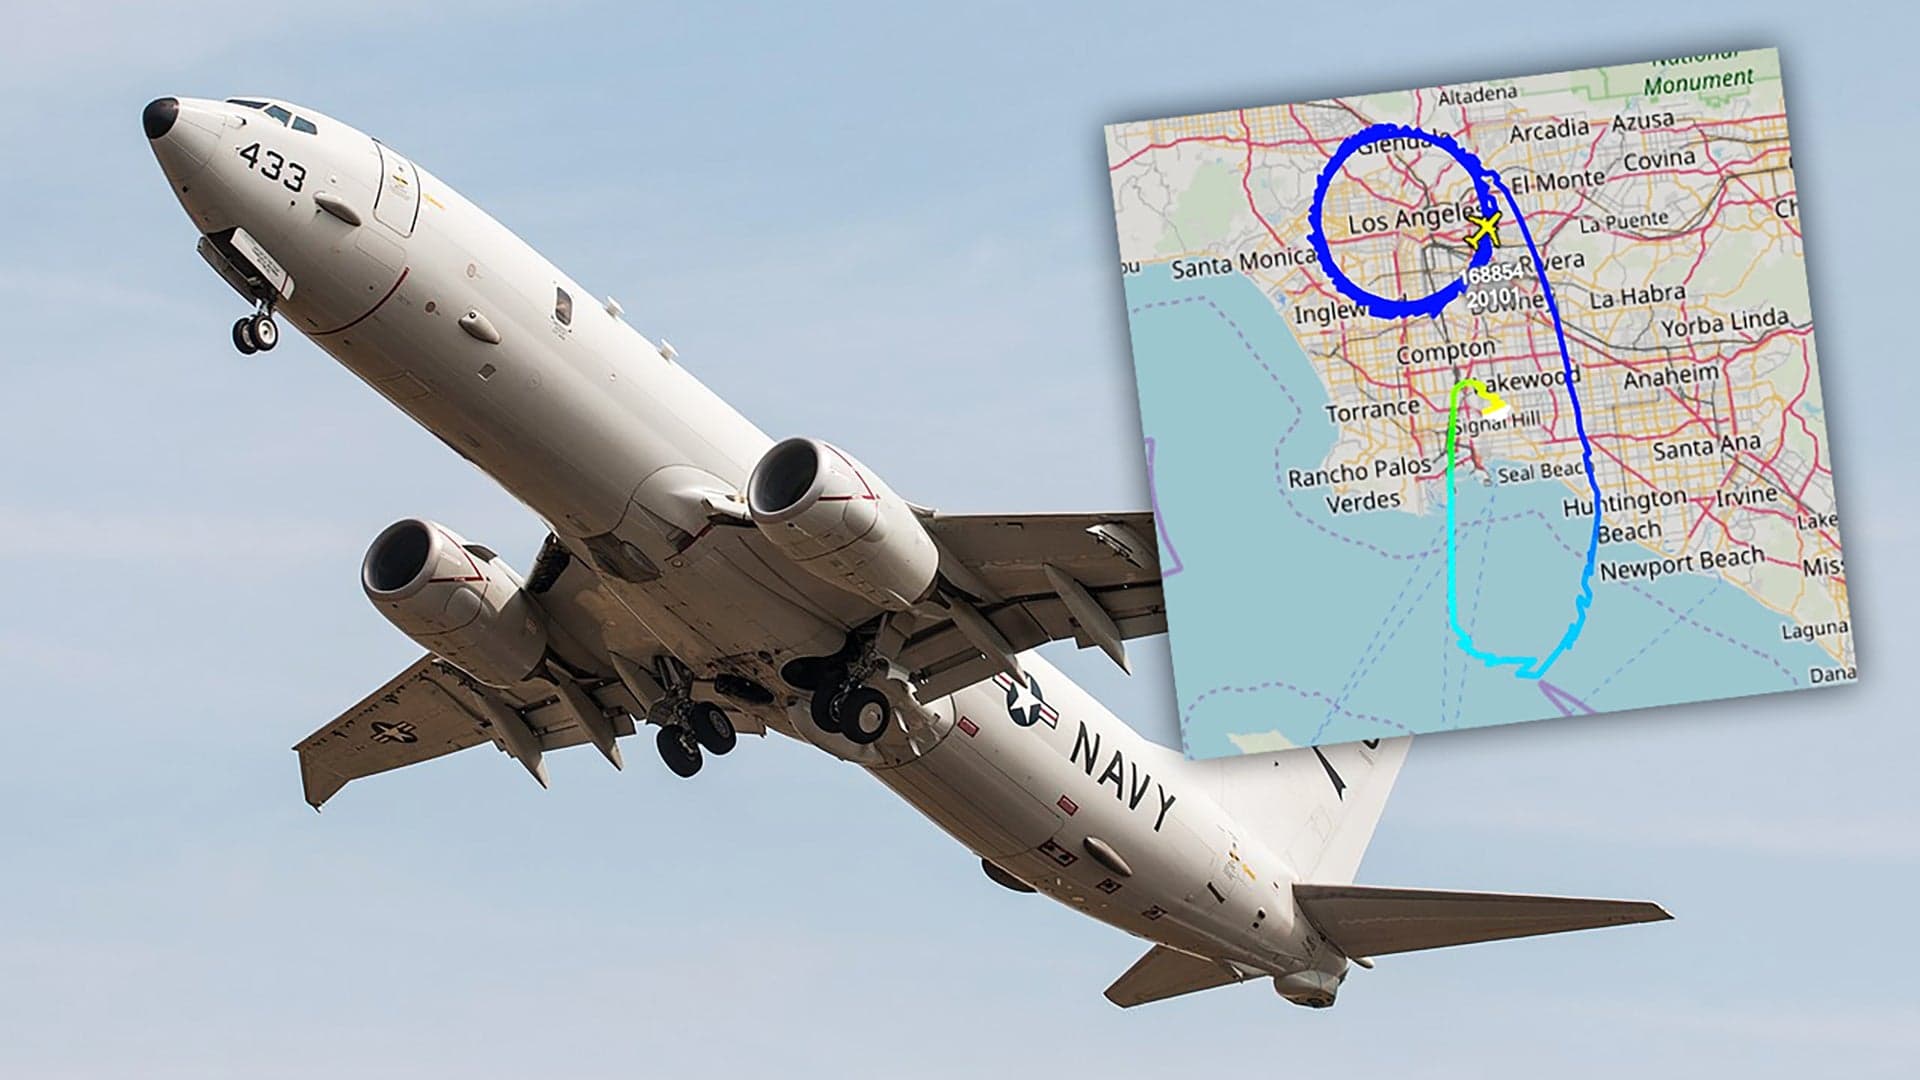 A Navy P-8 Poseidon Jet Has Been Flying Mysterious Circles Over Los Angeles For Hours (Updated)